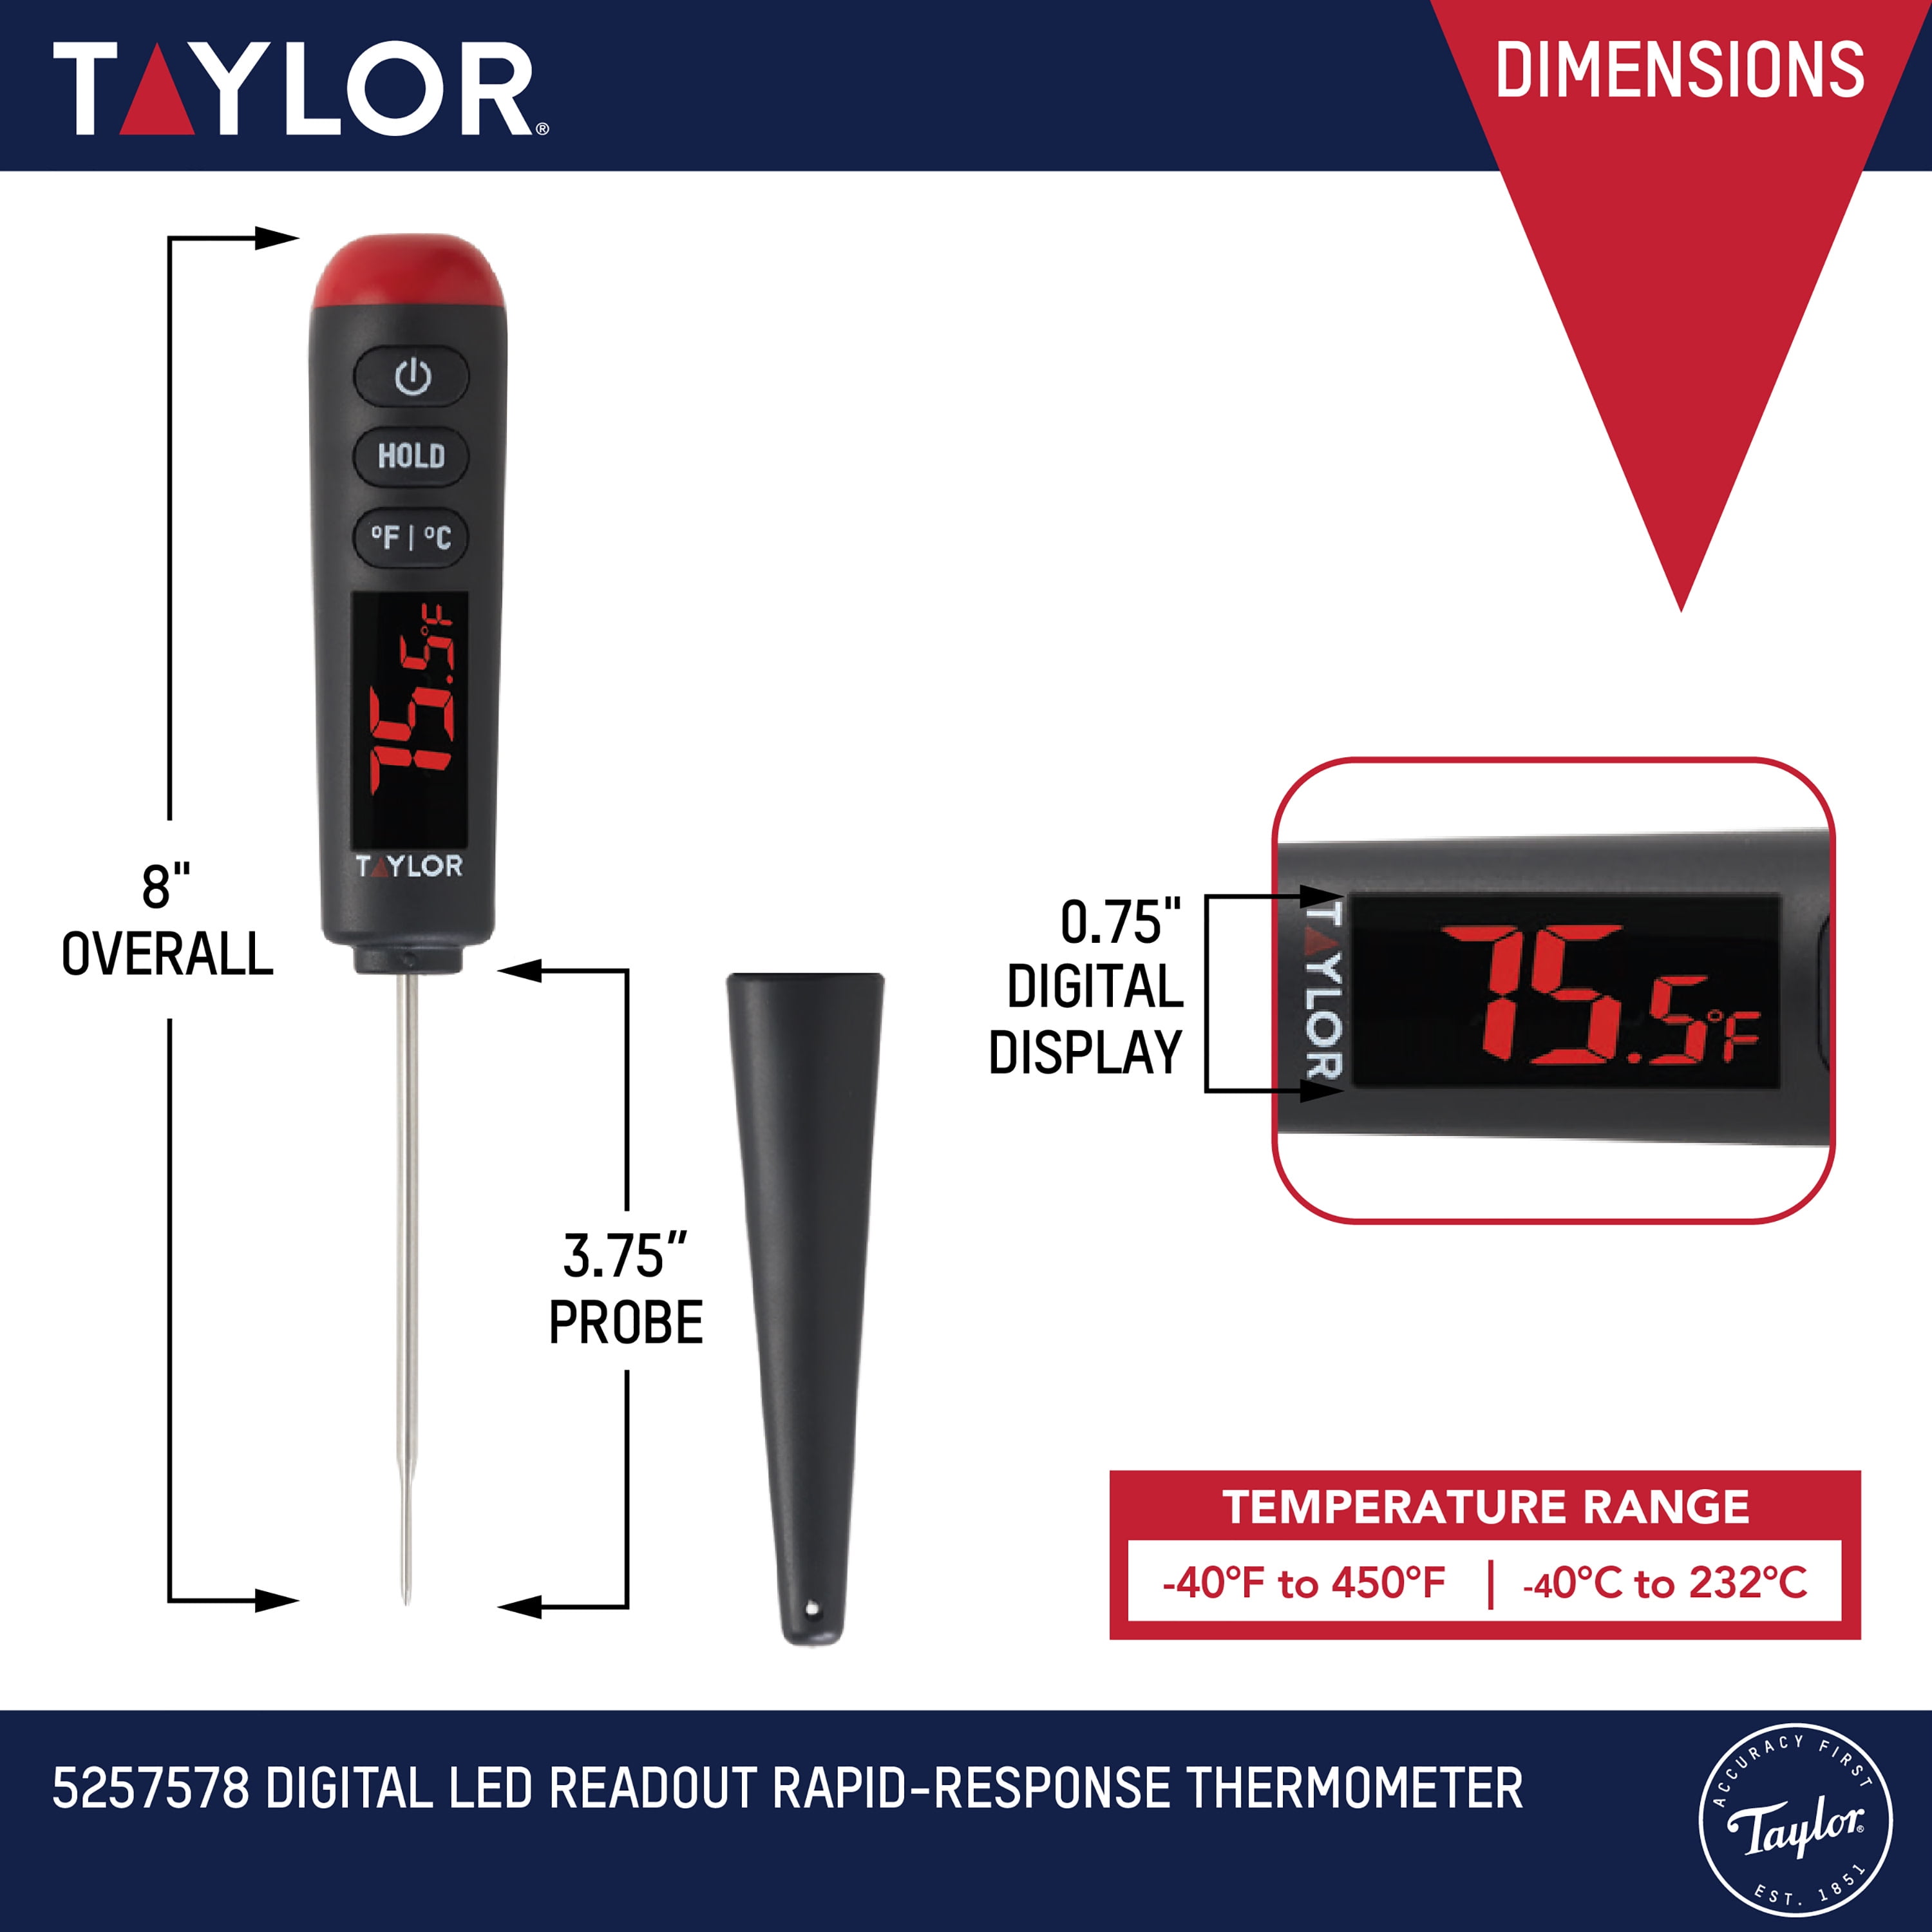 Taylor 3519FDA Digital Thermometer w/ Auto Off, Battery Included, LCD Readout, Black